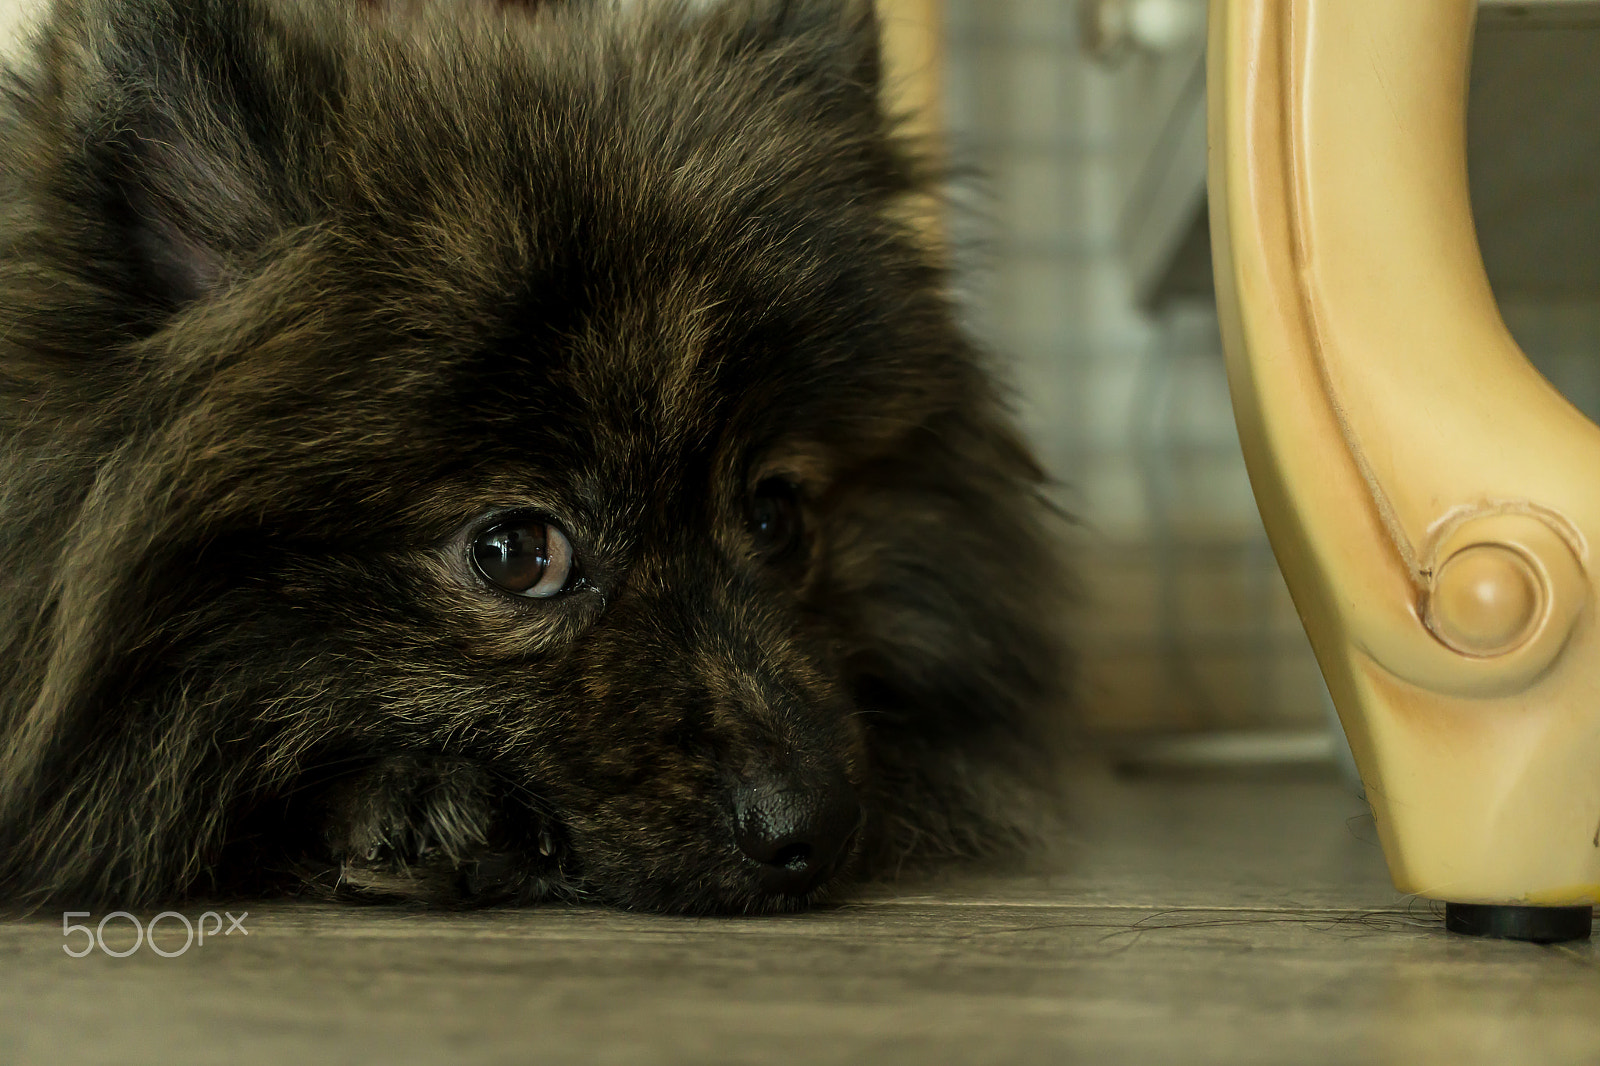 Sony a6300 sample photo. Pomeranian tiger hairs lethargic on the floor photography